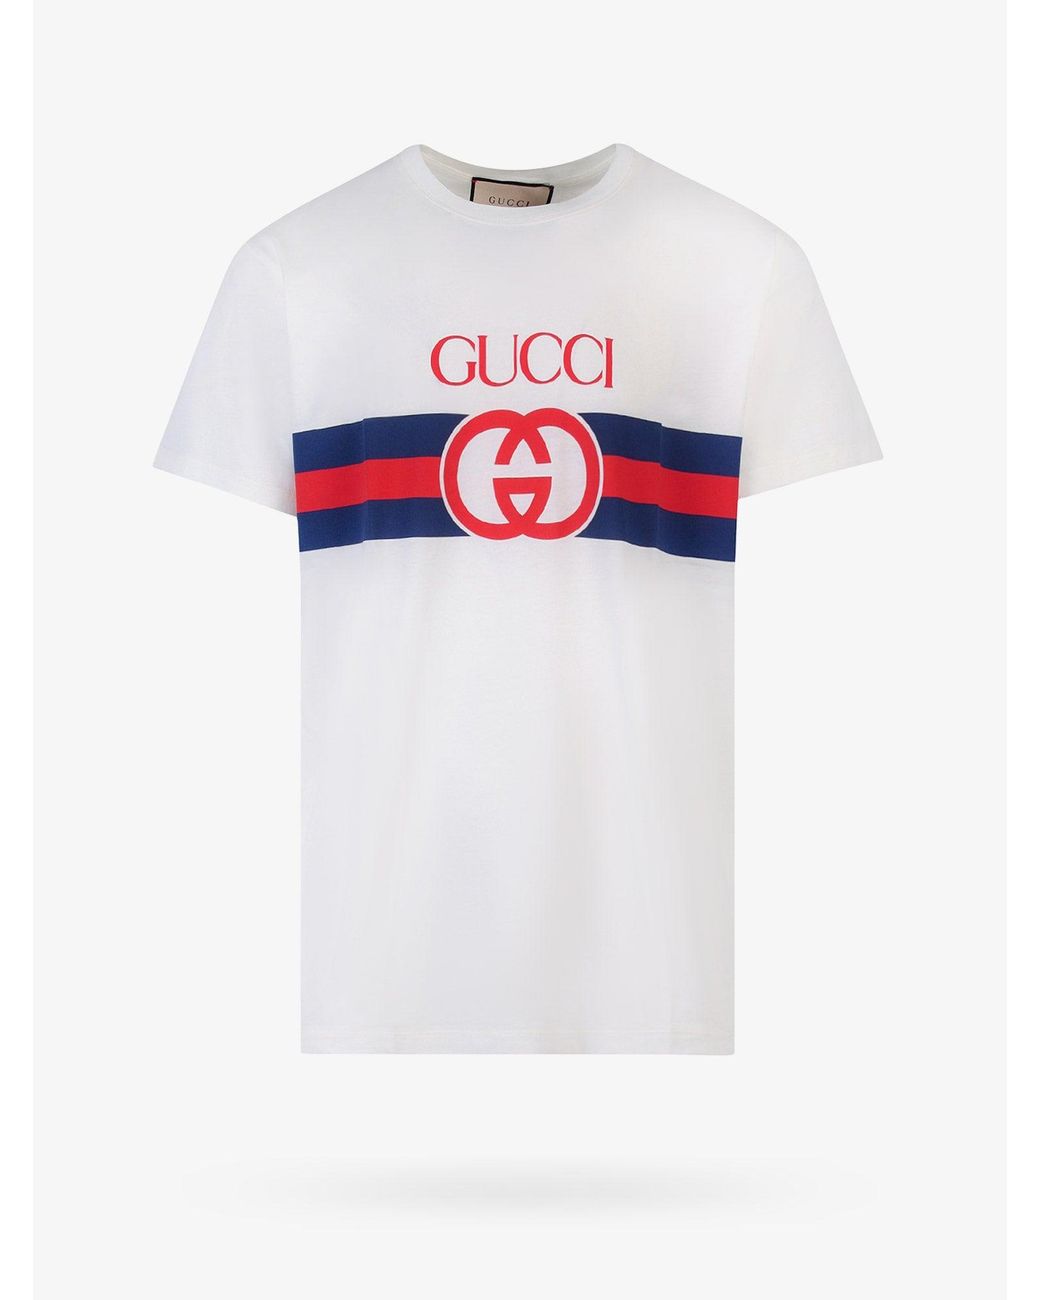 Gucci T-shirt in White for Men | Lyst